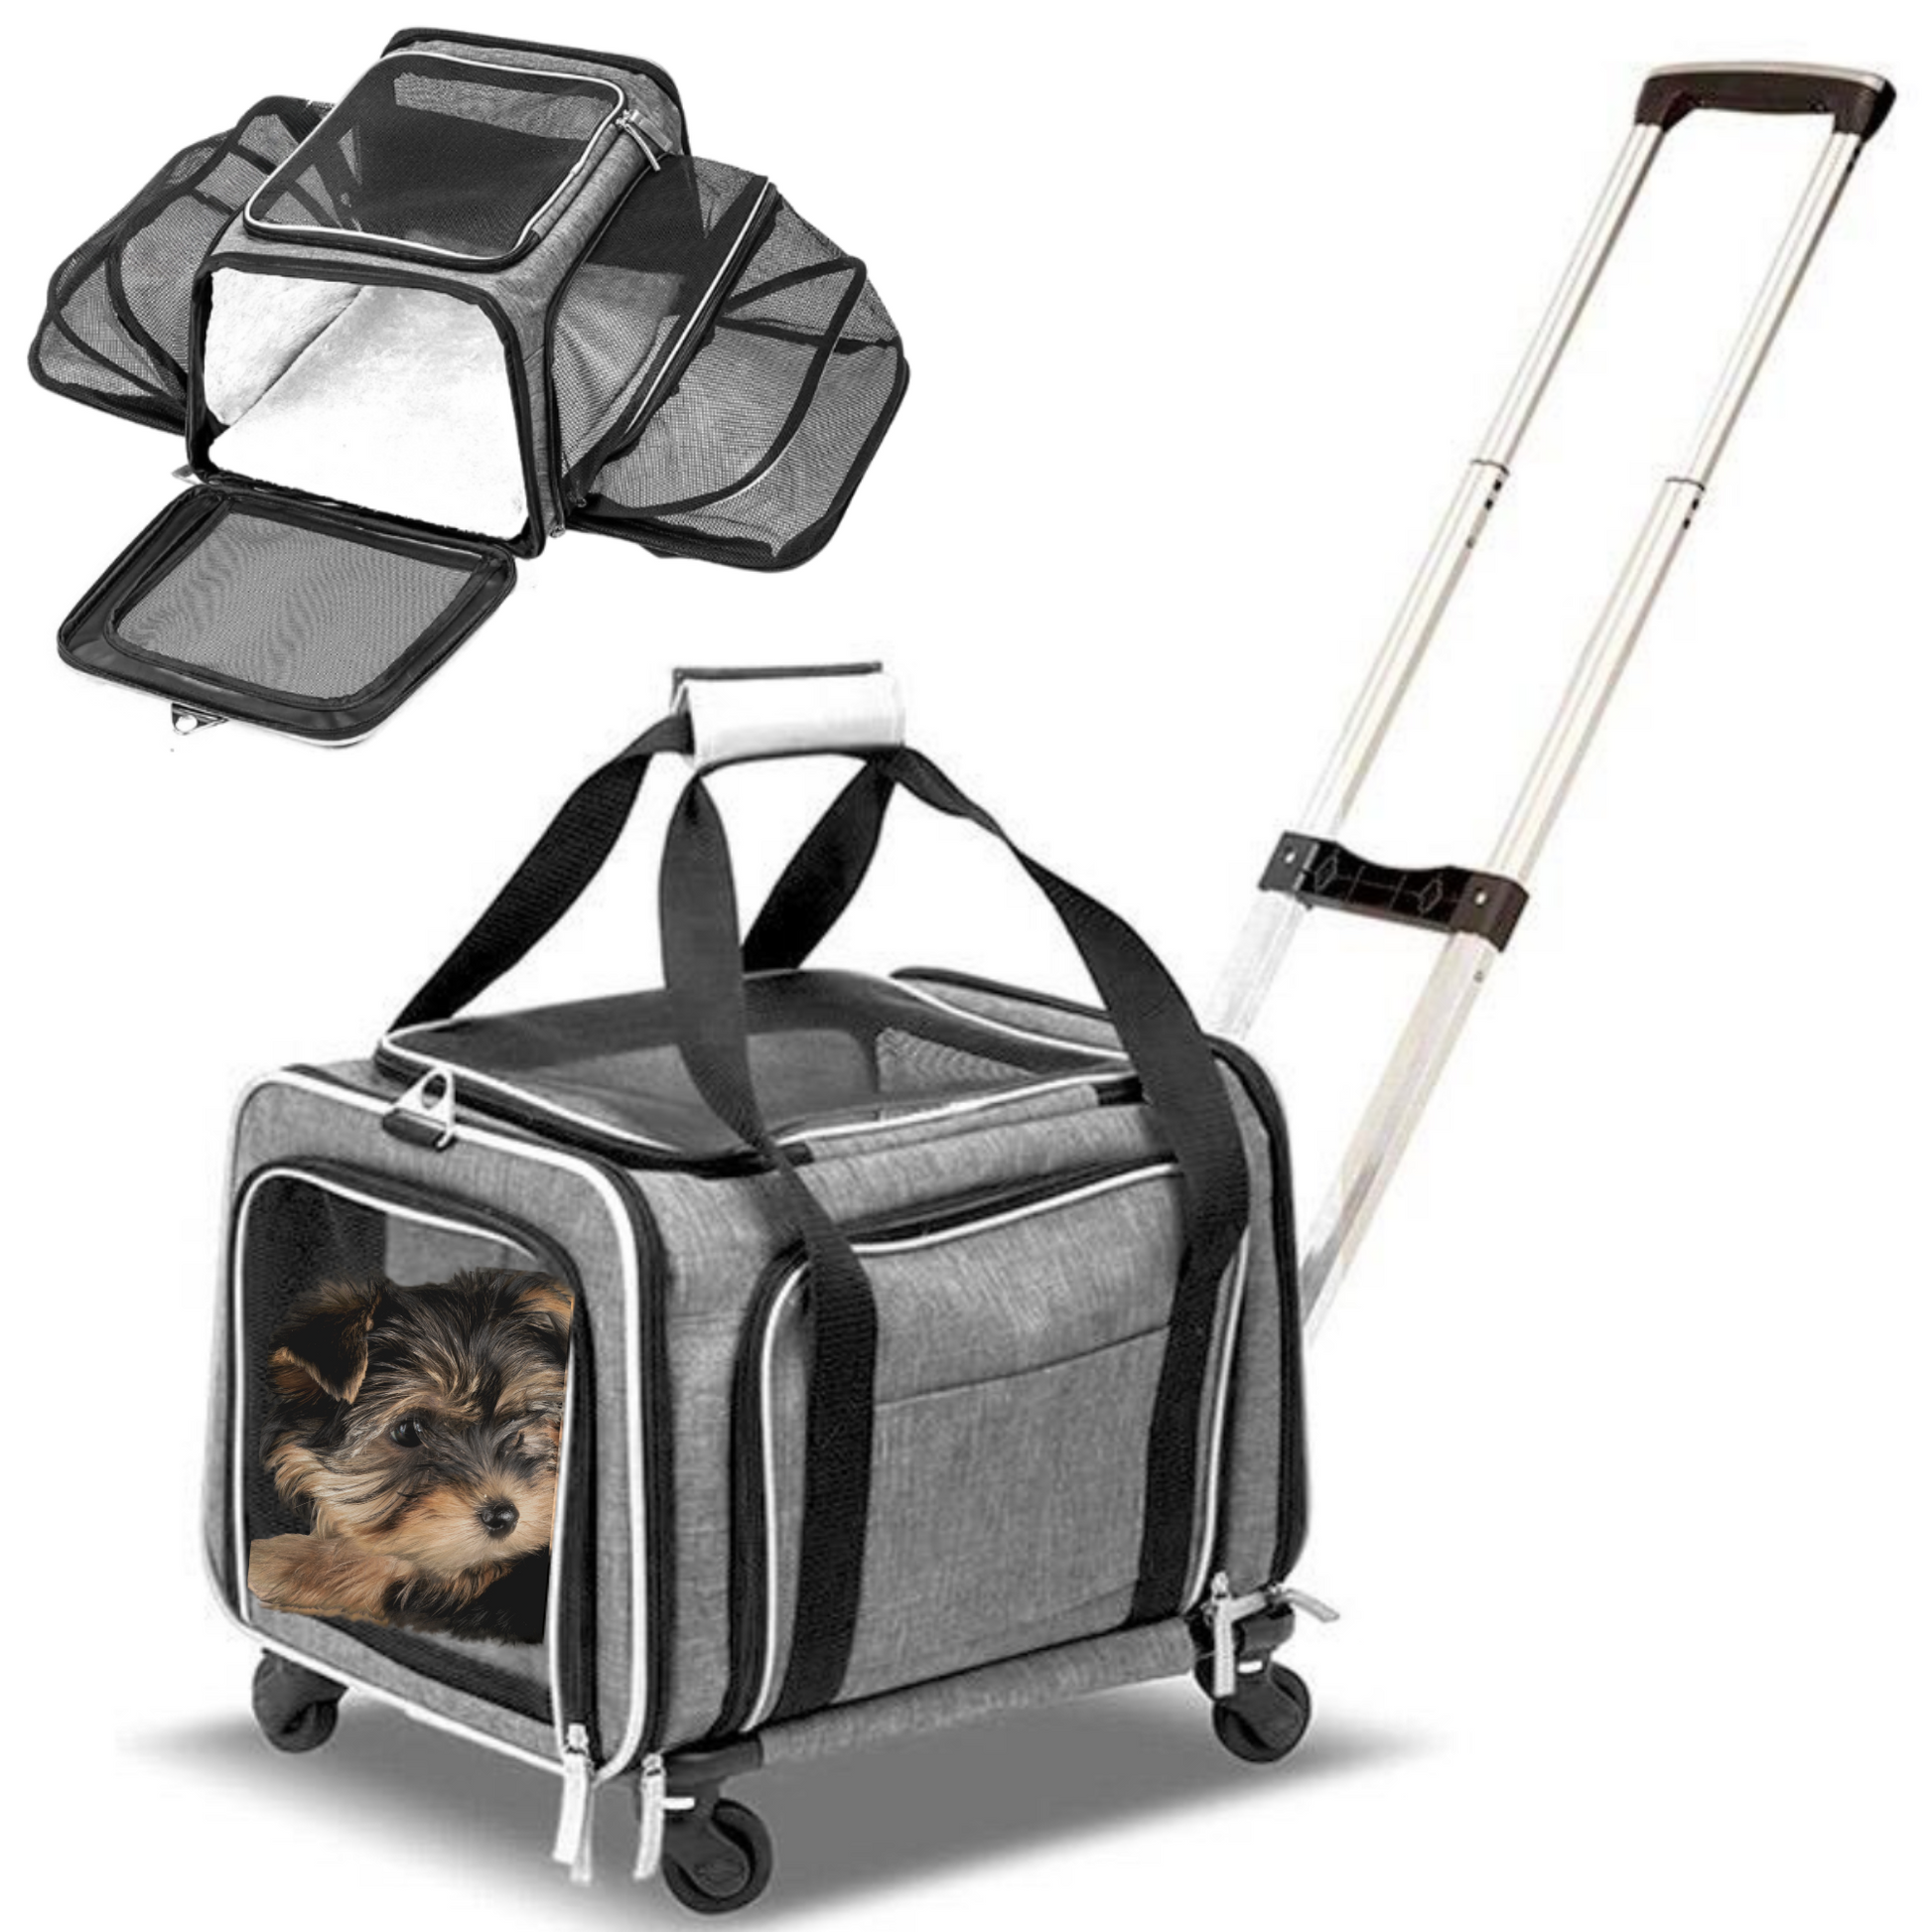 7 Of The Best Airline-Approved Dog Carriers For In-Cabin Flights